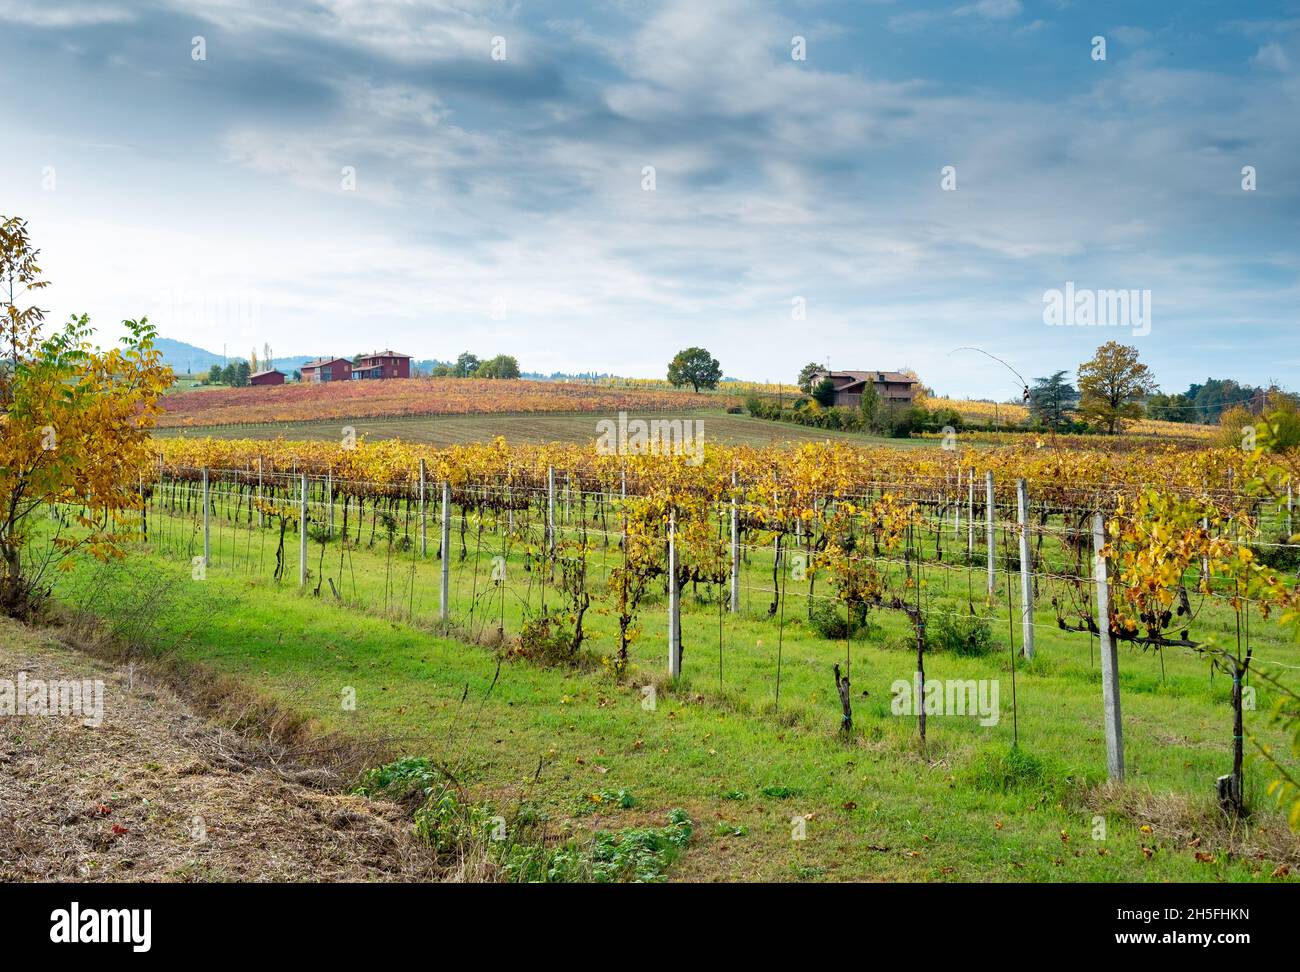 Autumnal vineyards on the rolling hills of Bologna countryside. Crespellano, Bologna province, Emilia-Romagna, Italy Stock Photo